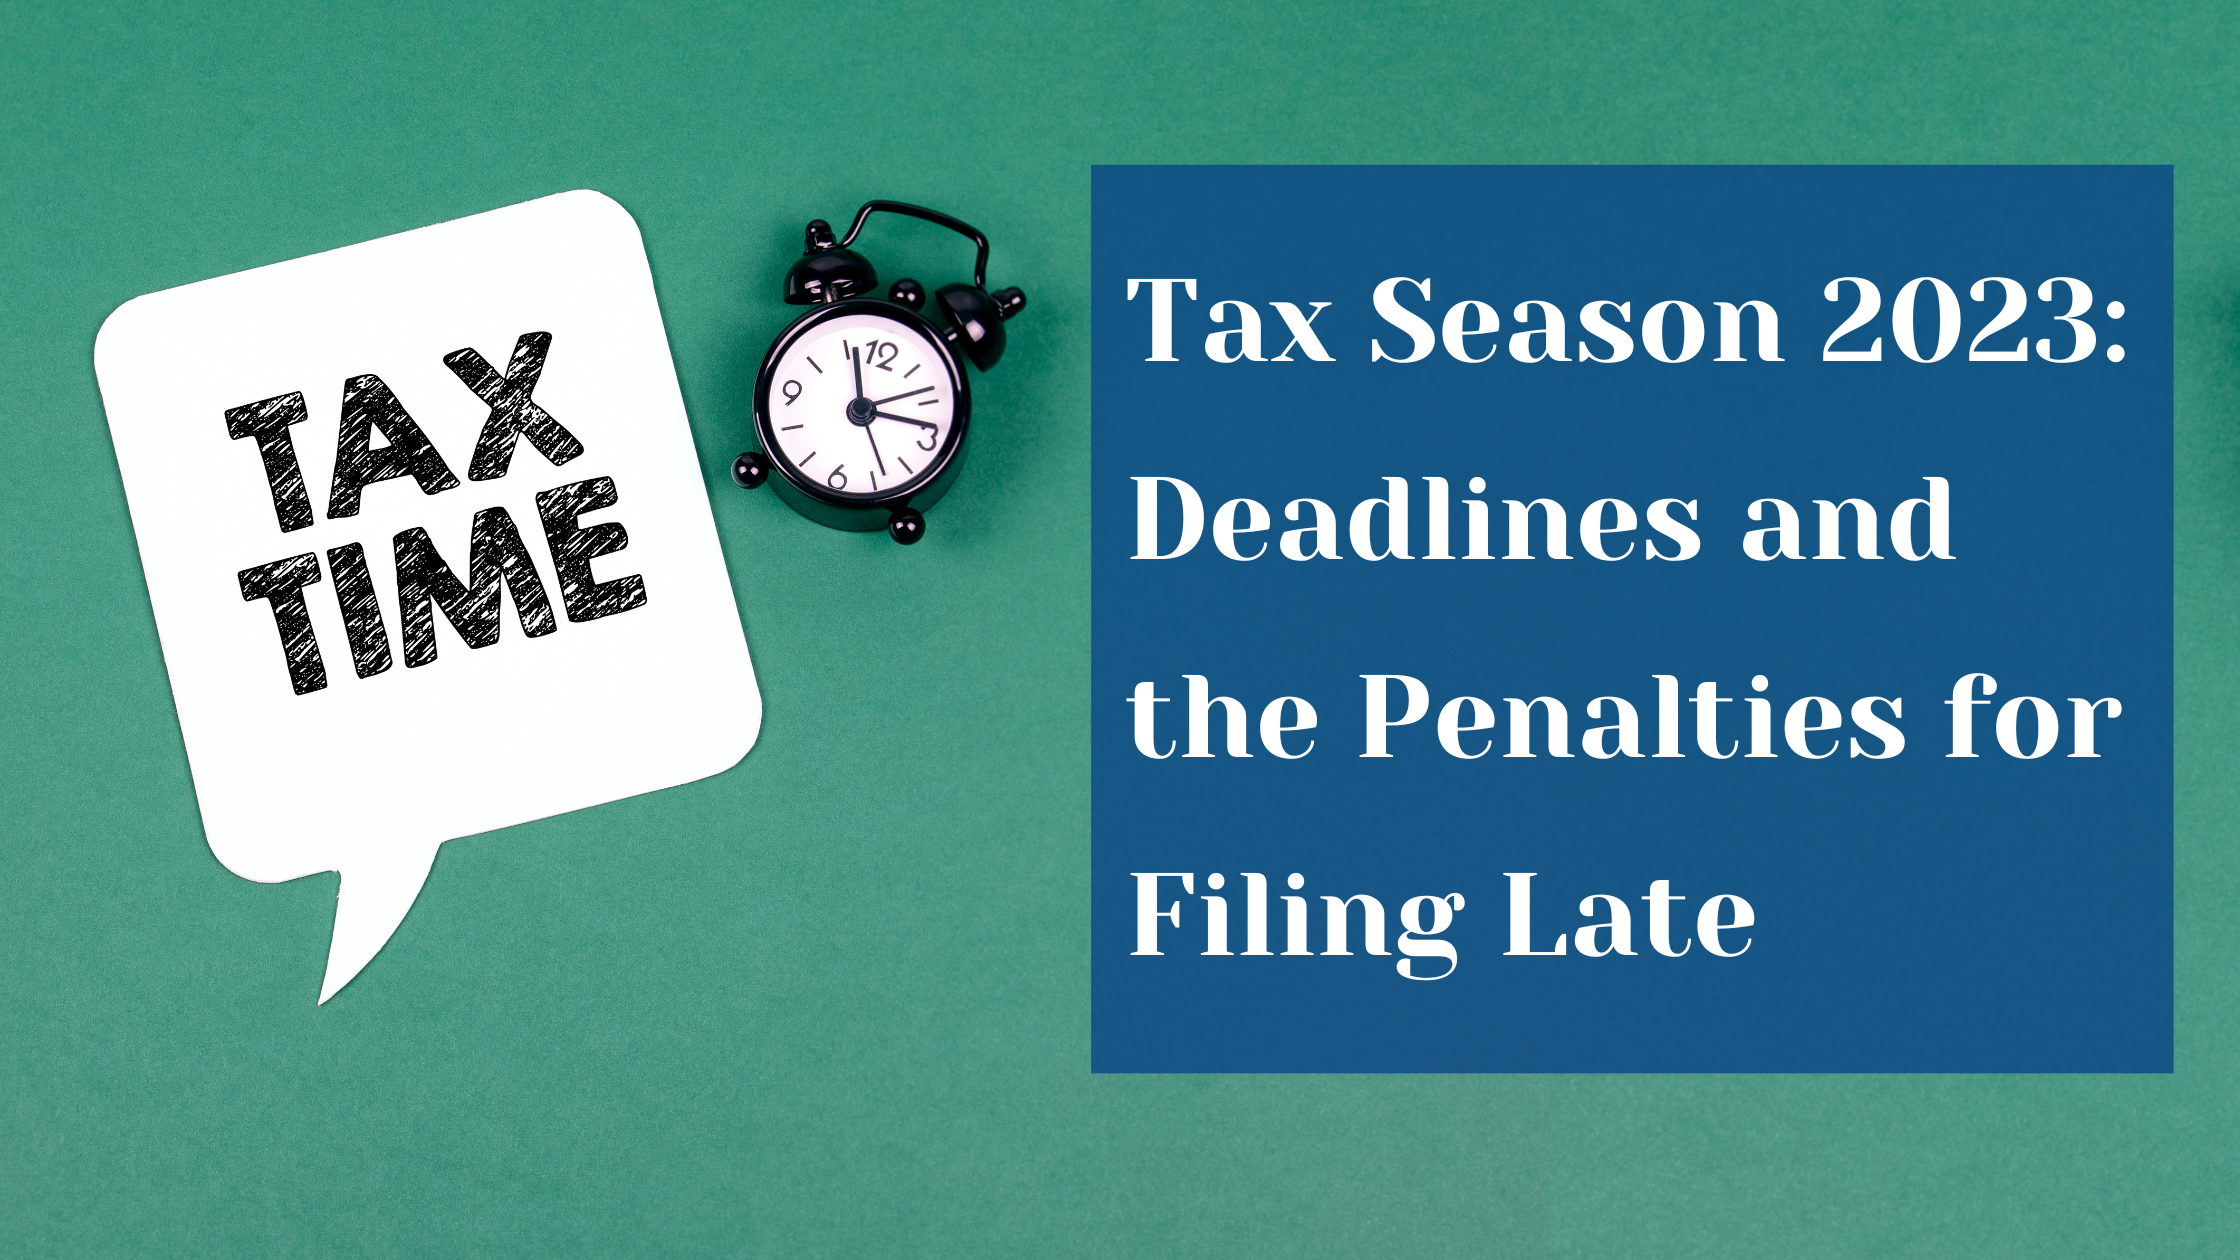 Tax Season 2023: Deadlines and the Penalties for Filing Late